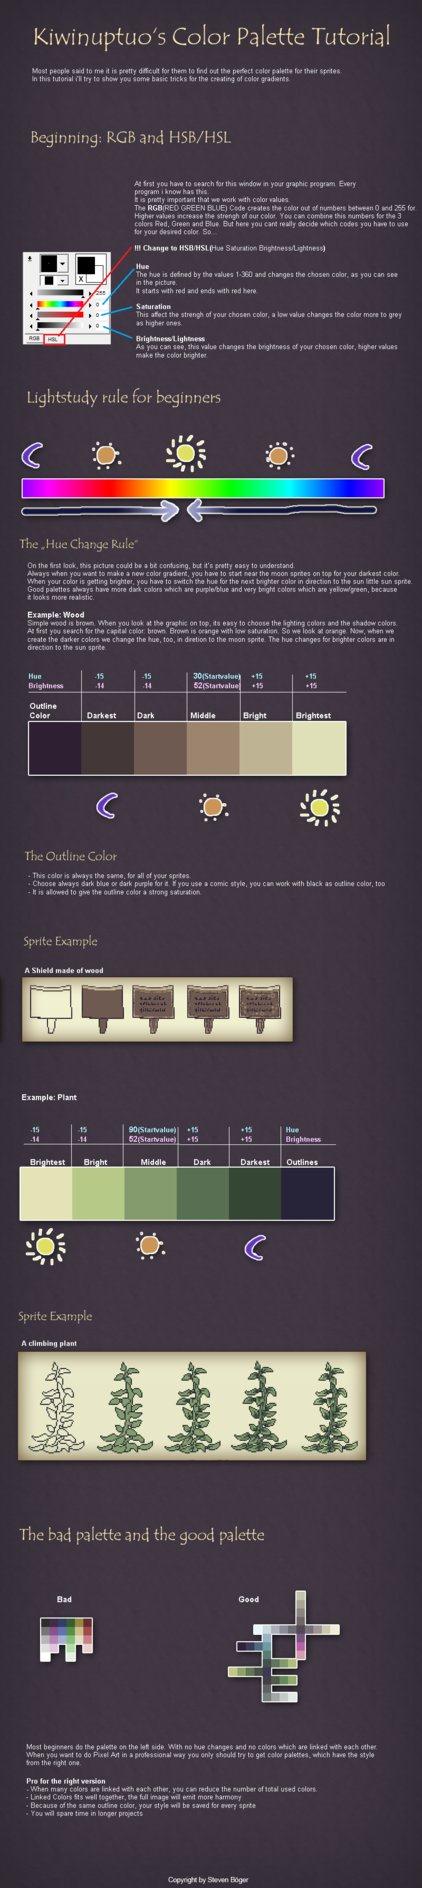 Pixel Art Tutorial Colors by Kiwinuptuo photoshop resource collected by psd-dude.com from deviantart